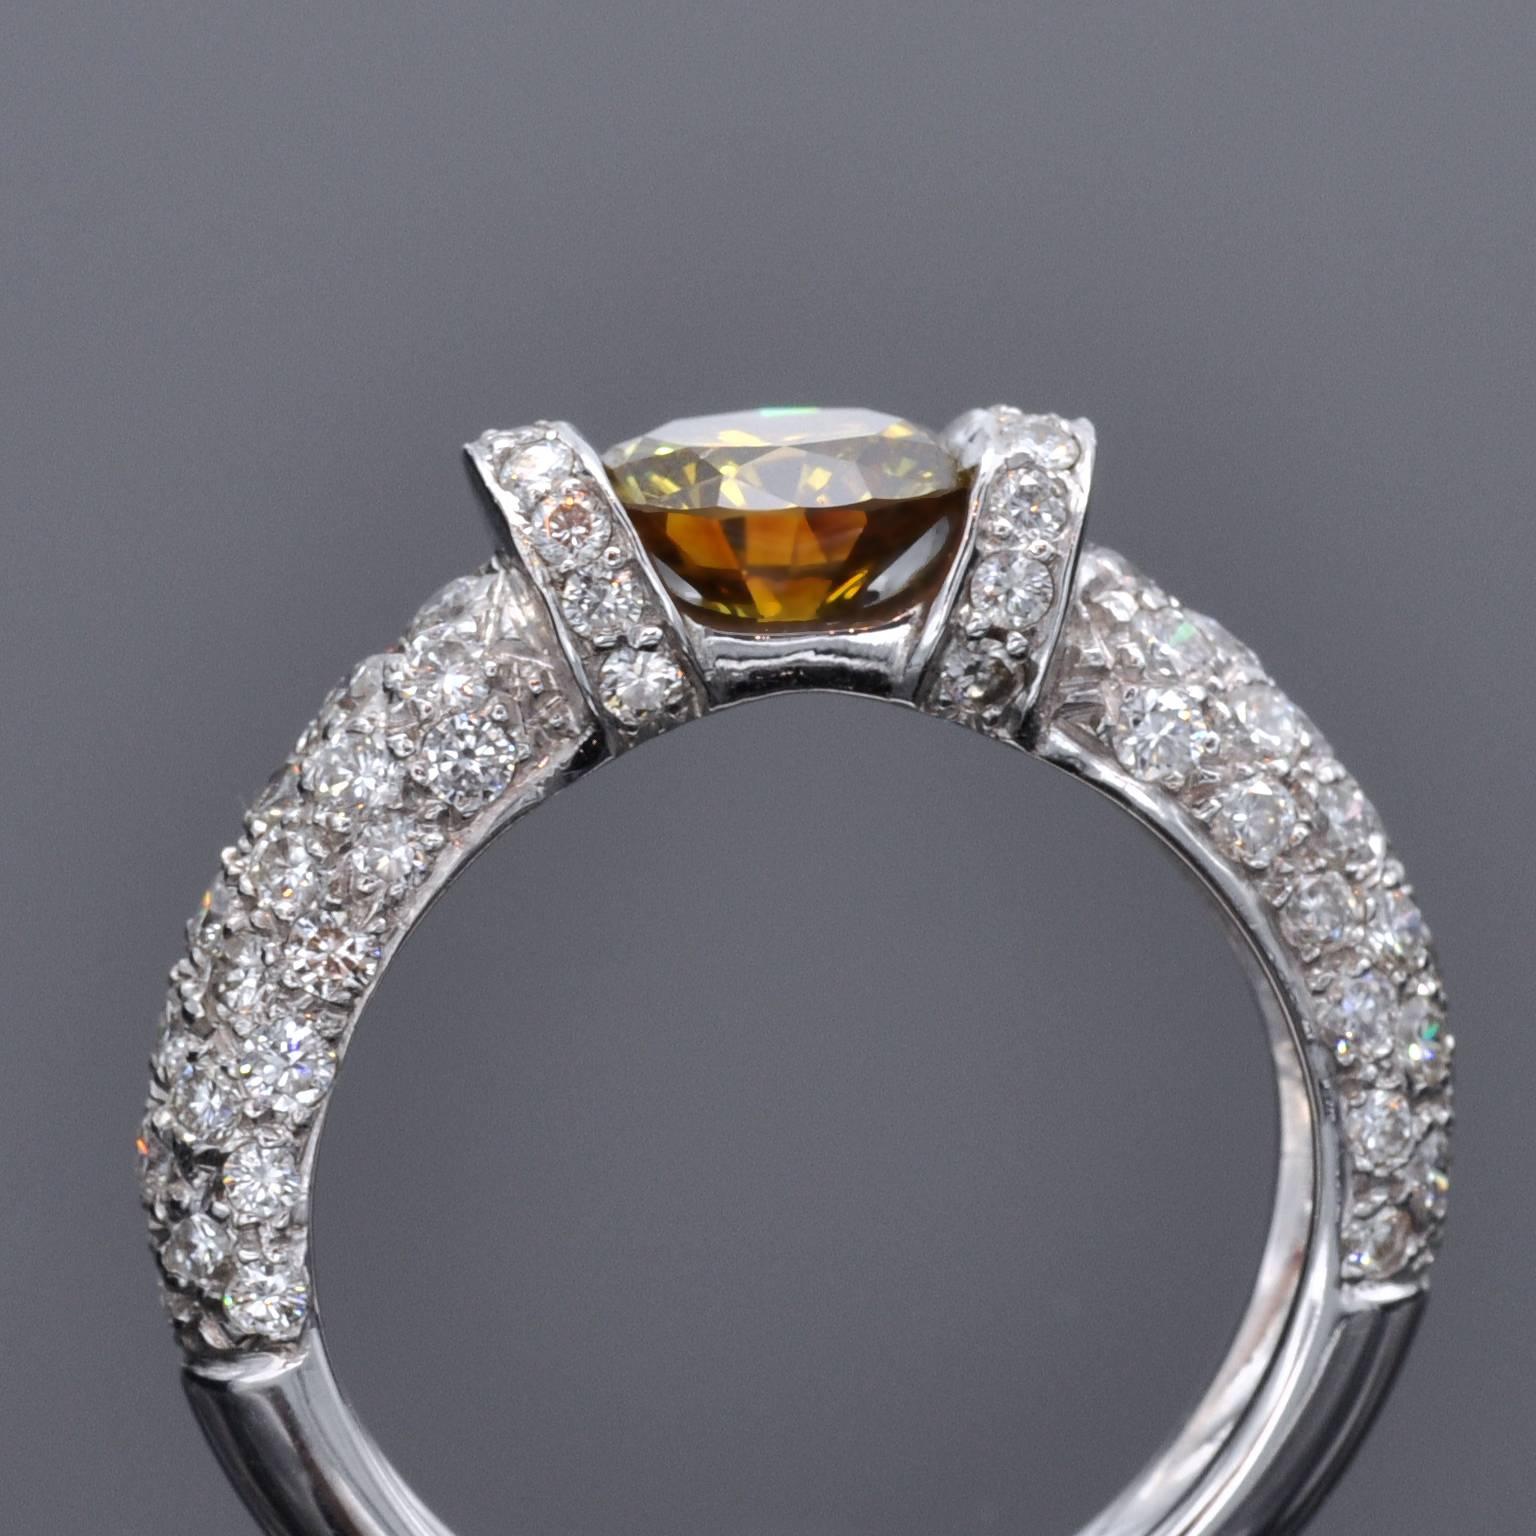 Amazing engagement solitaire ring. The center diamond a 1.25 carat Intense Orange Yellow round brilliant weighing held only on to sides revealing it beauty from all sides. It comes with a HRD ( the leading European lab) certificate .
On the body of